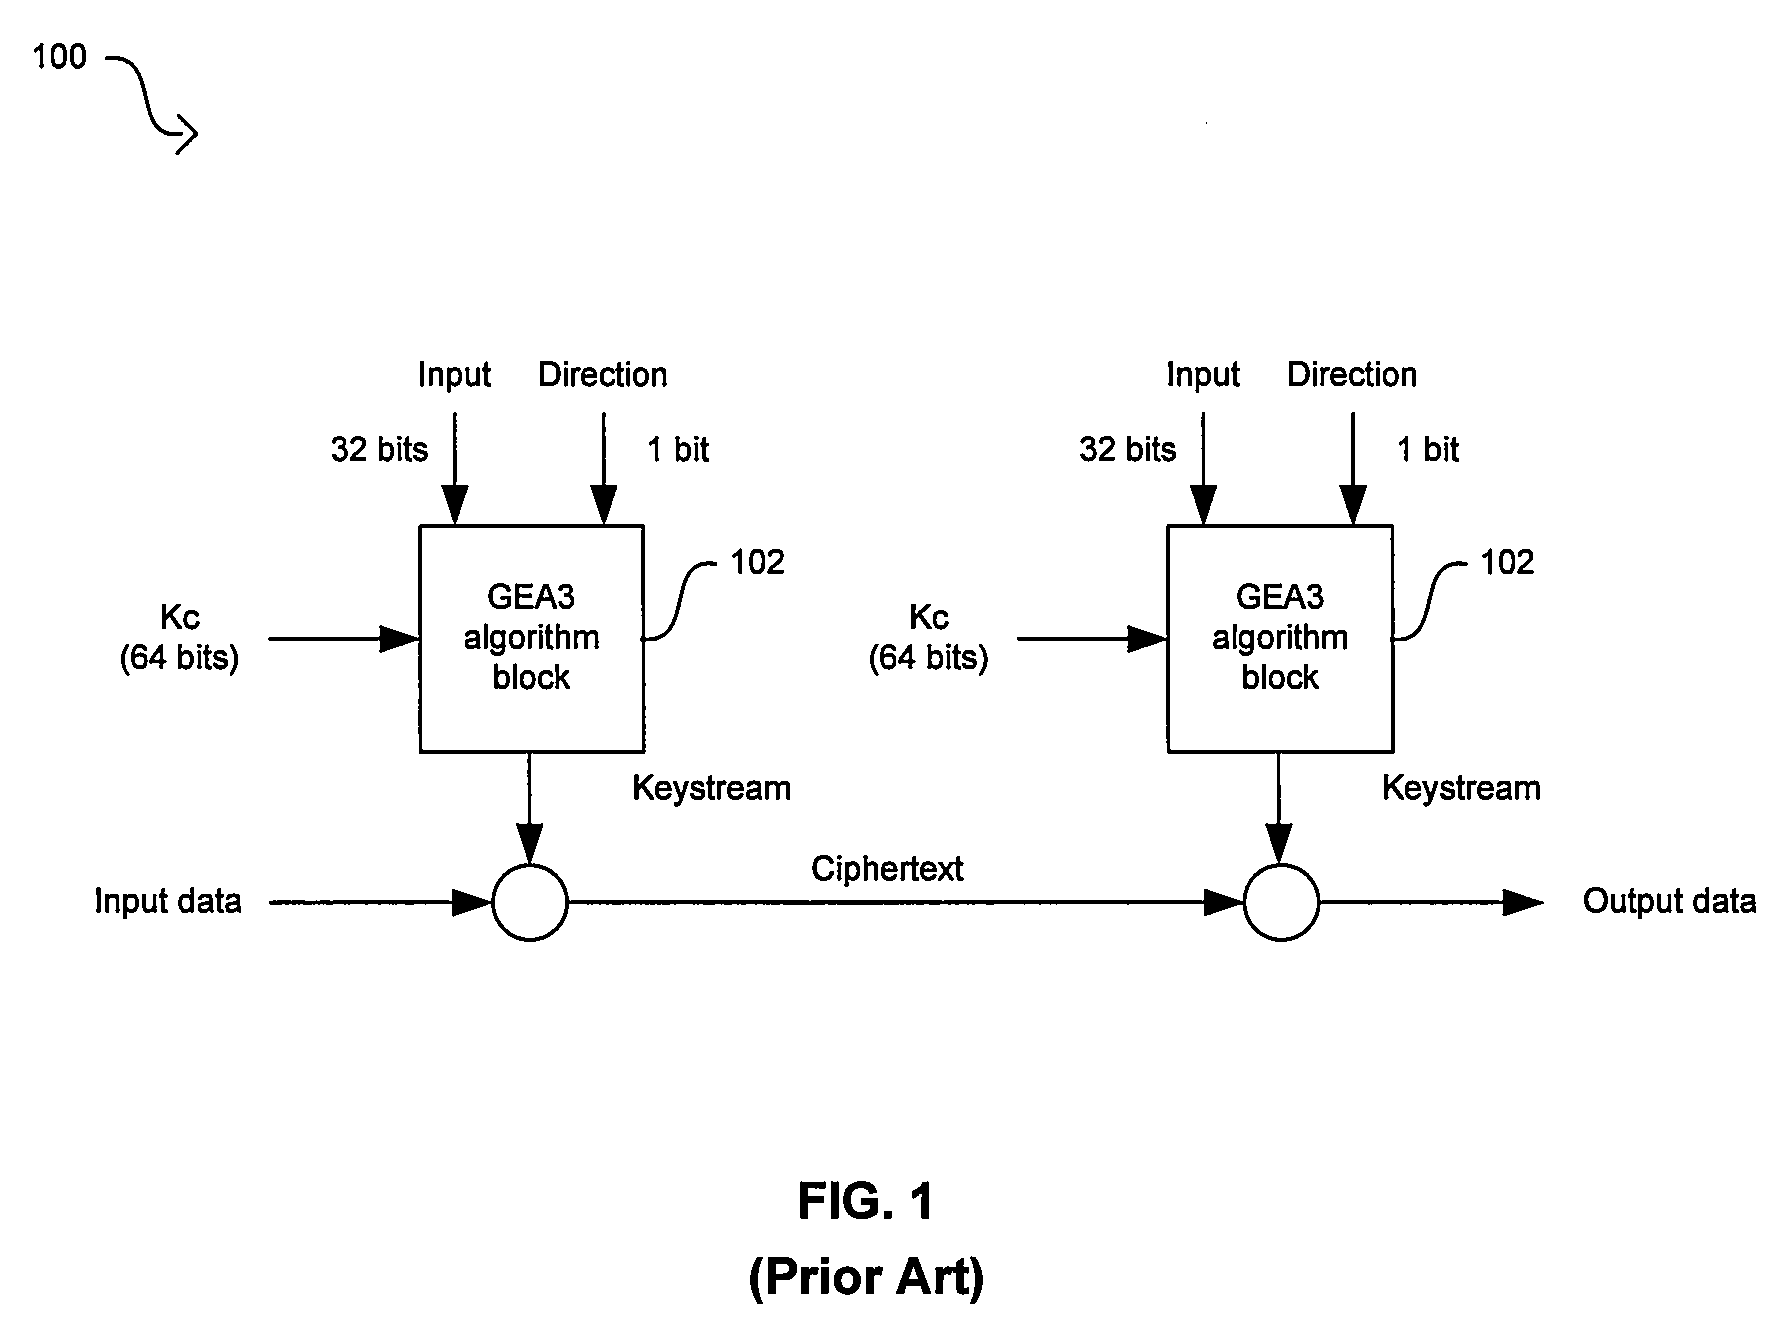 Method and system for implementing the GEA3 encryption algorithm for GPRS compliant handsets